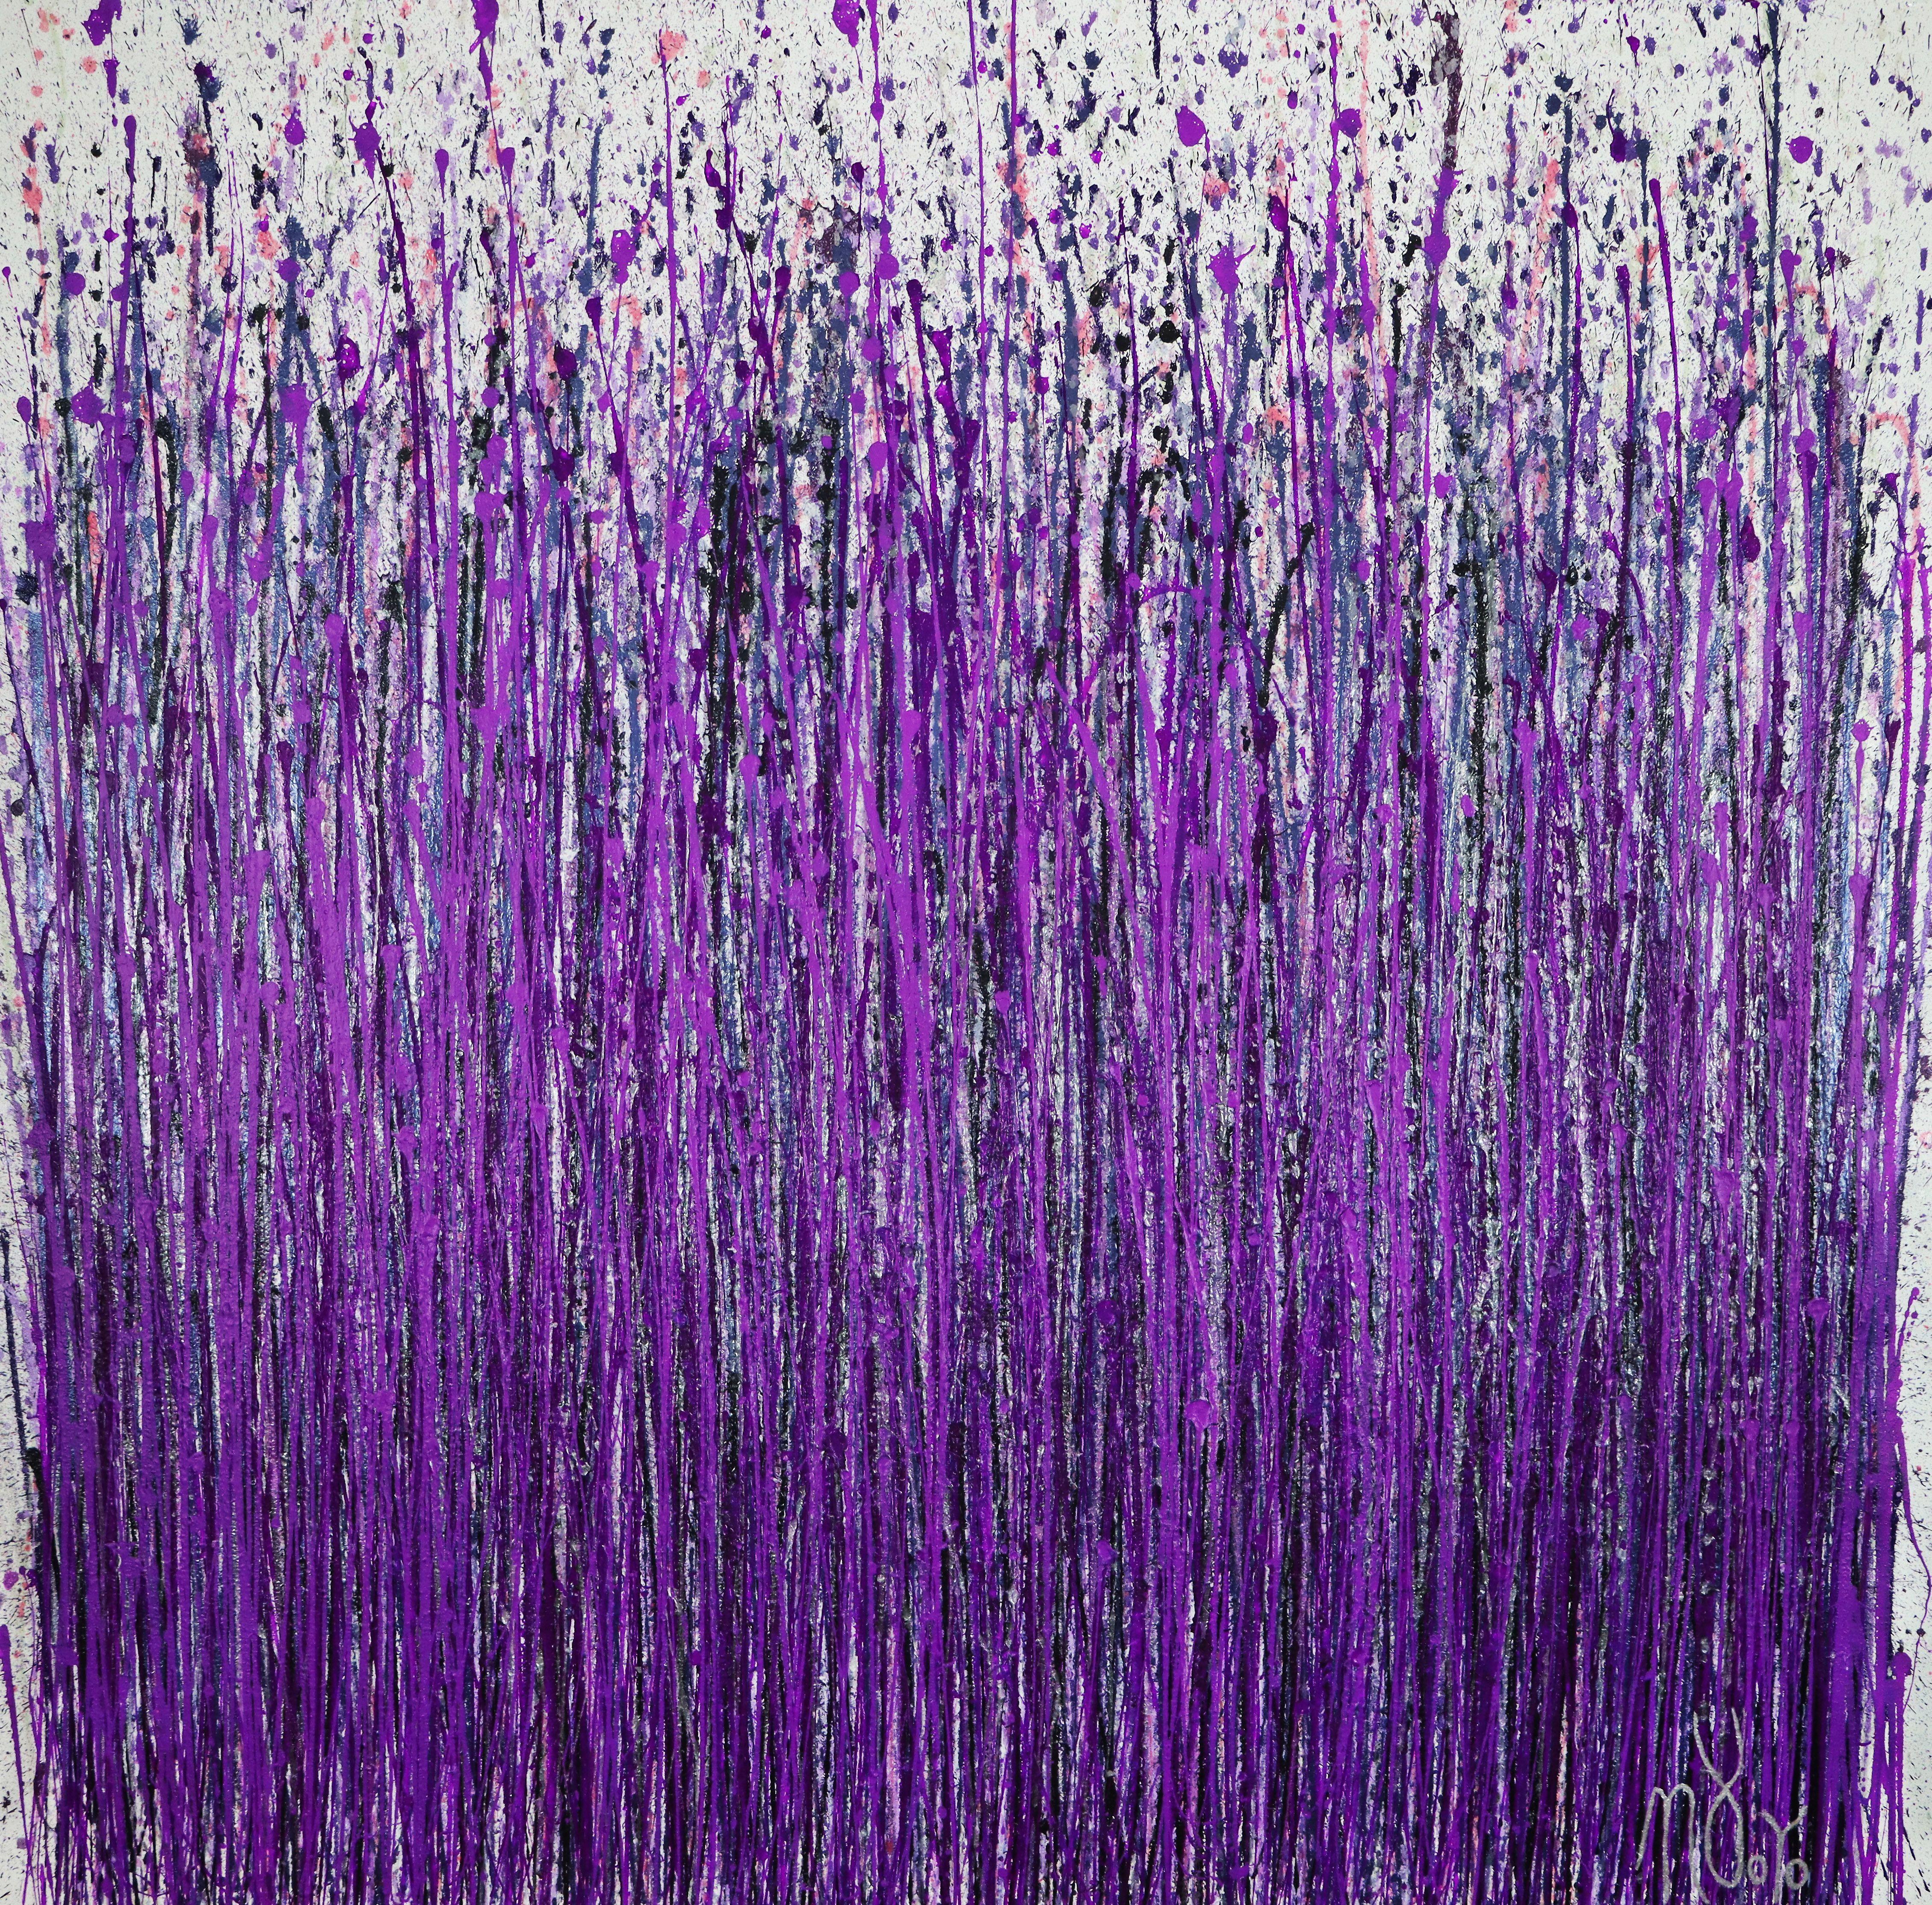 Nestor Toro Abstract Painting - Provence (Lavender Imagery), Painting, Acrylic on Canvas